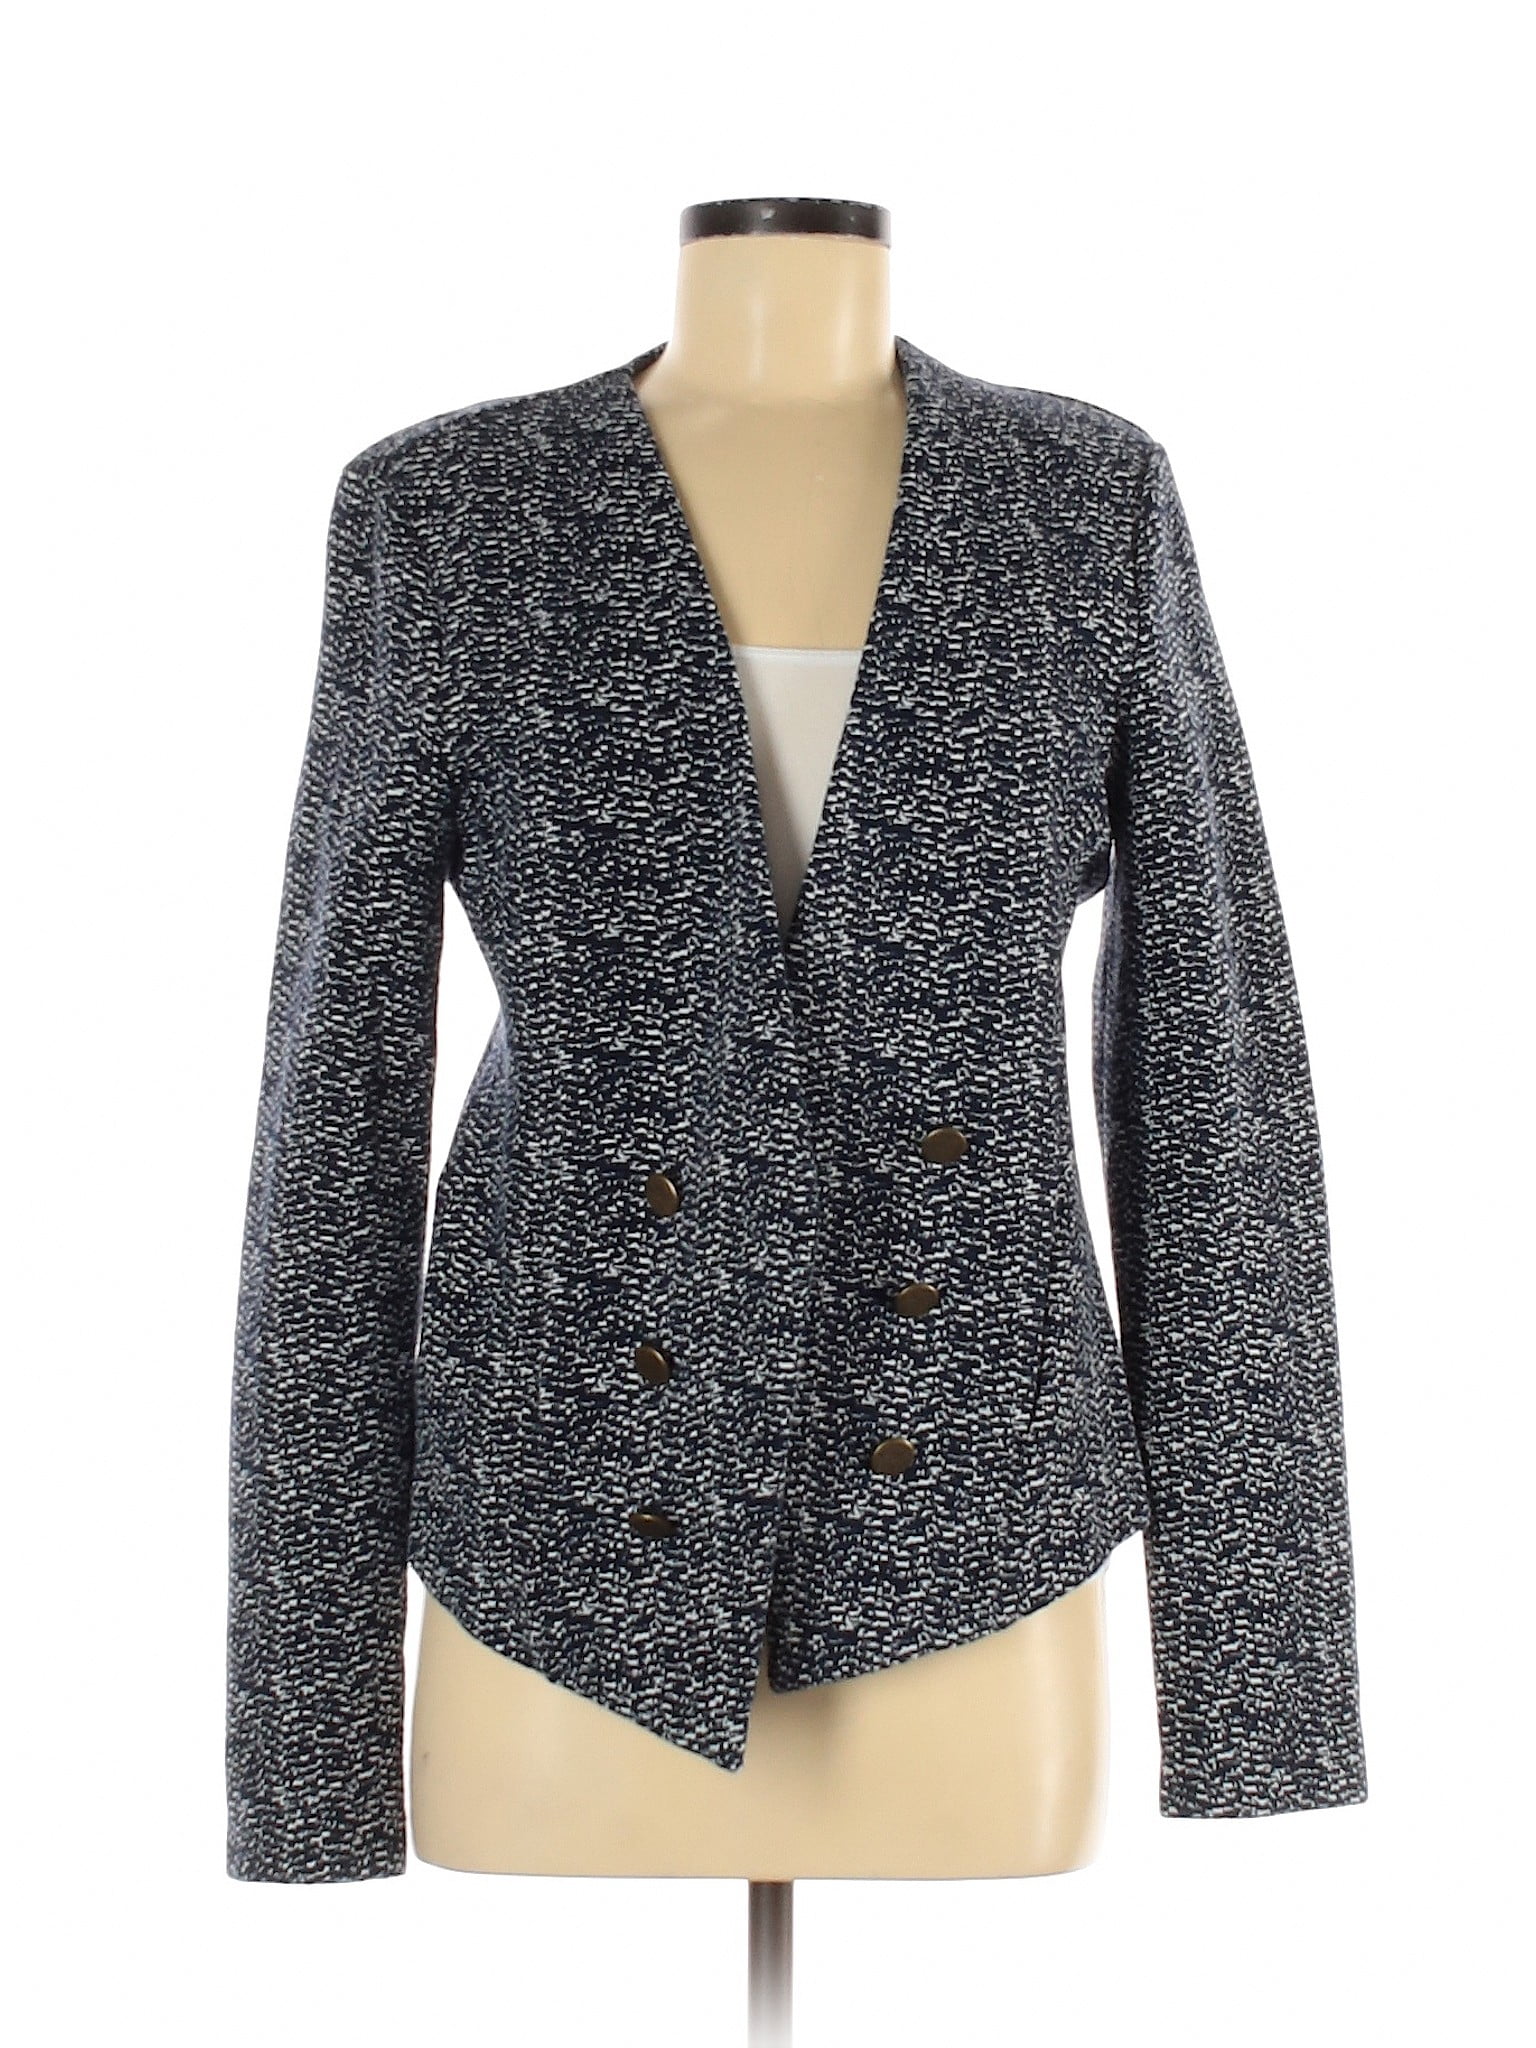 Tart Collections - Pre-Owned Tart Collections Women's Size M Blazer ...